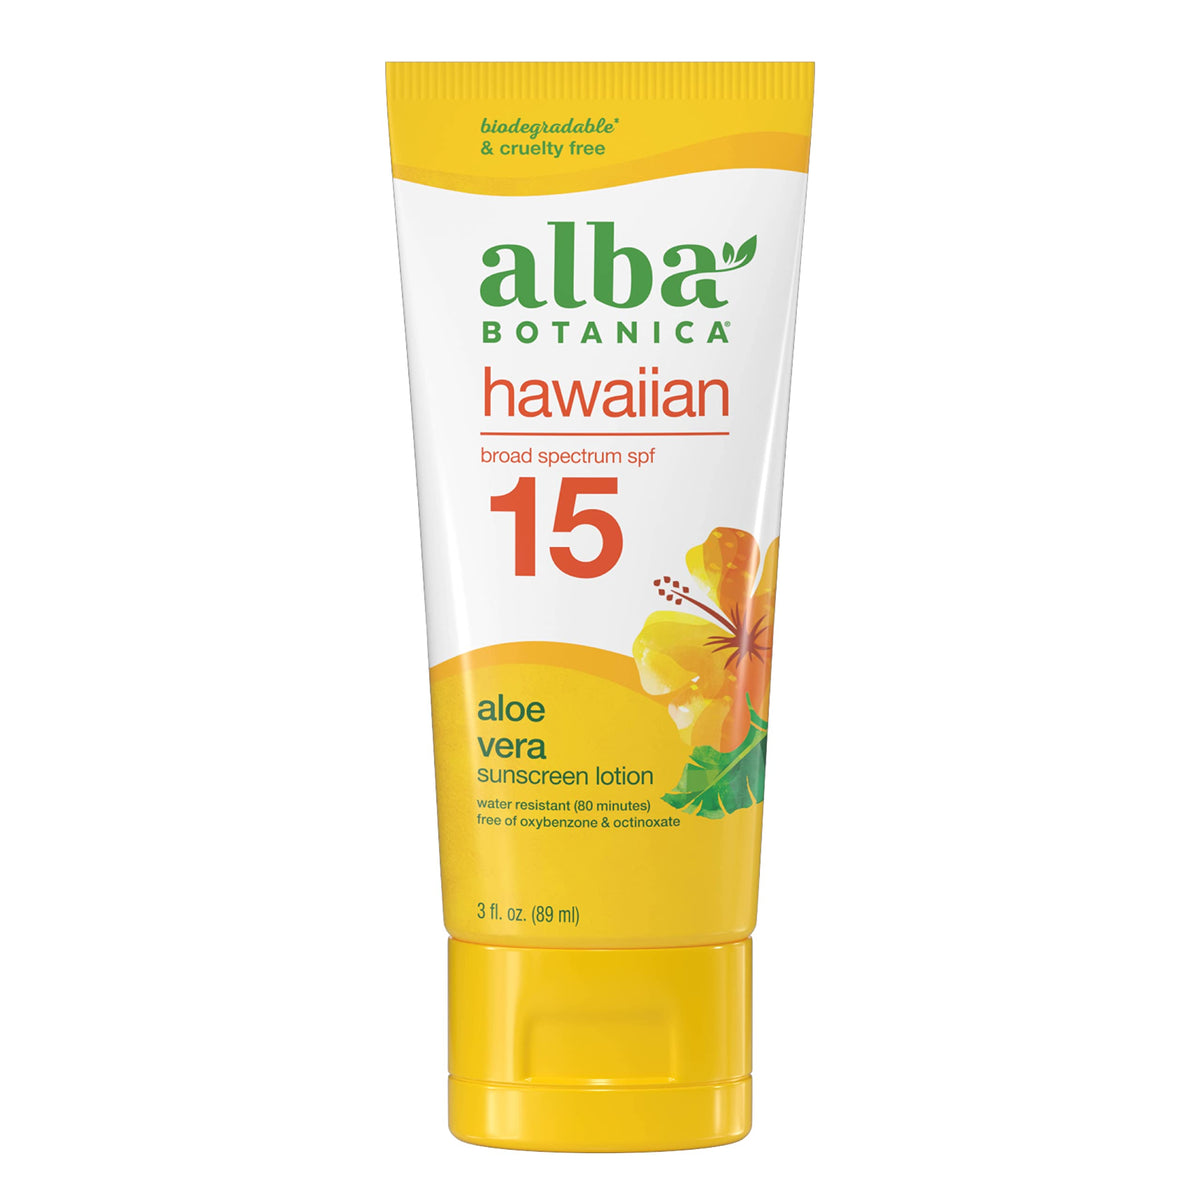 Alba Botanica Sunscreen for Face and Body, Hawaiian Aloe Vera Sunscreen Lotion, Broad Spectrum SPF 15 Sunscreen, Water Resistant and Biodegradable, 3 fl. oz. Bottle